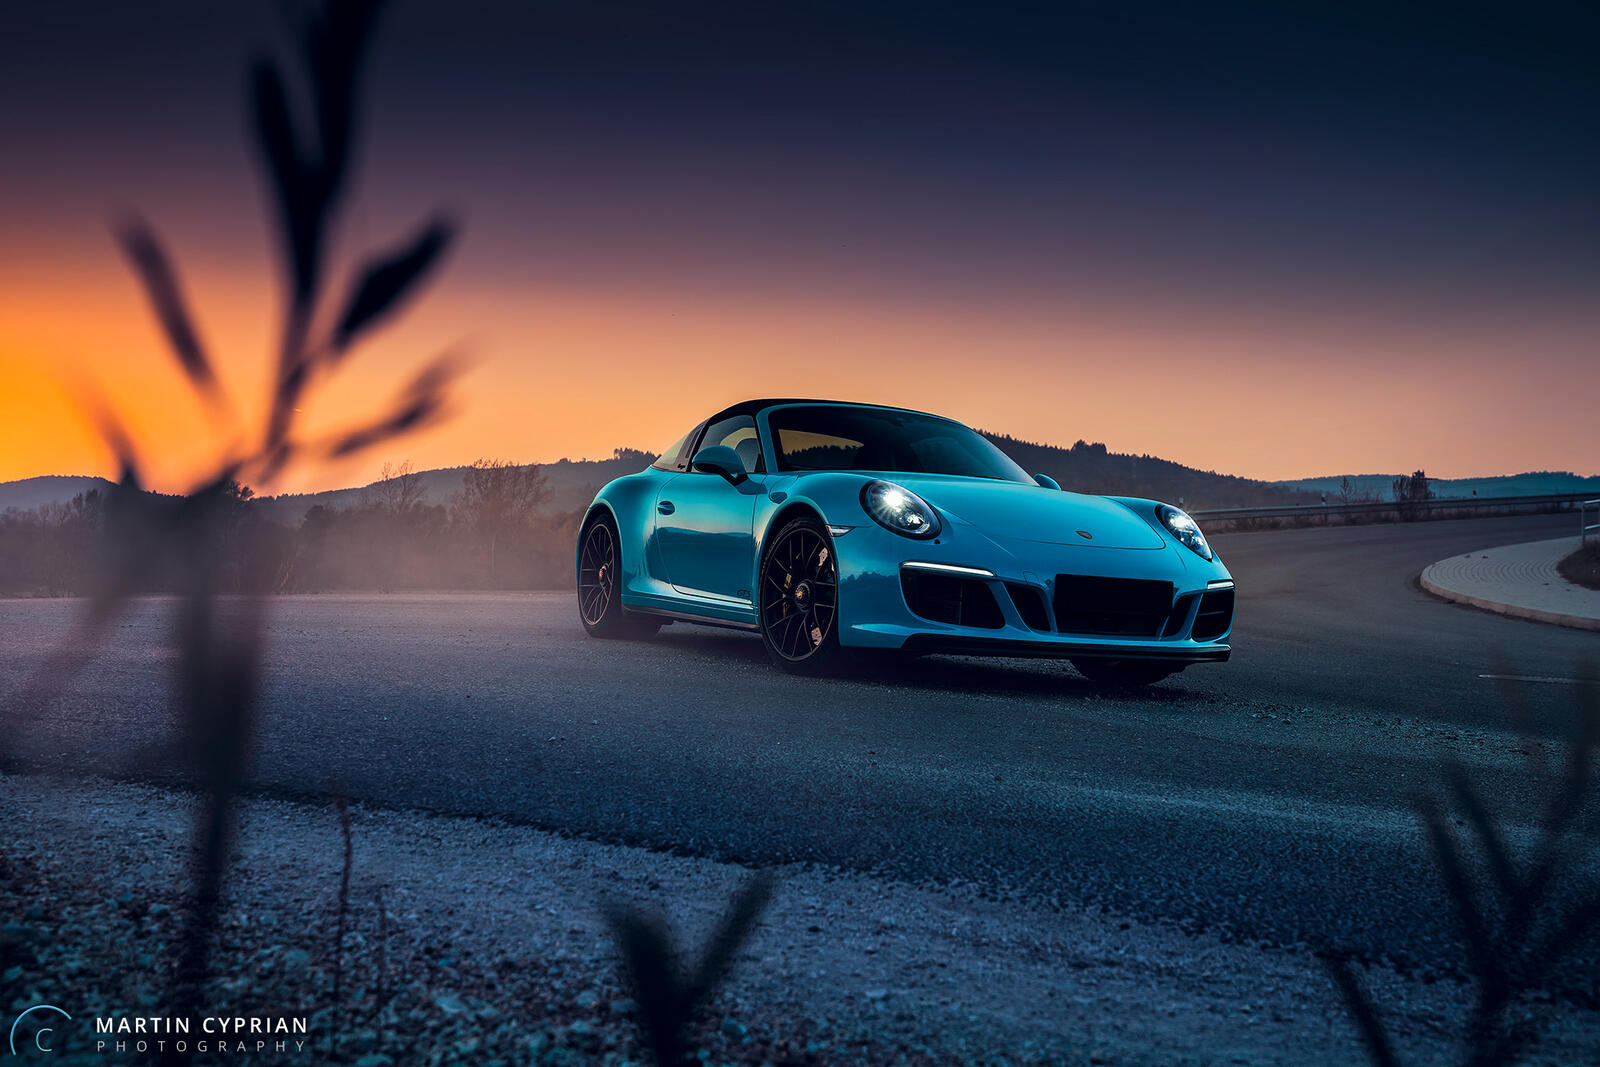 Free photo A blue Porsche 911 drives down a country road in the evening